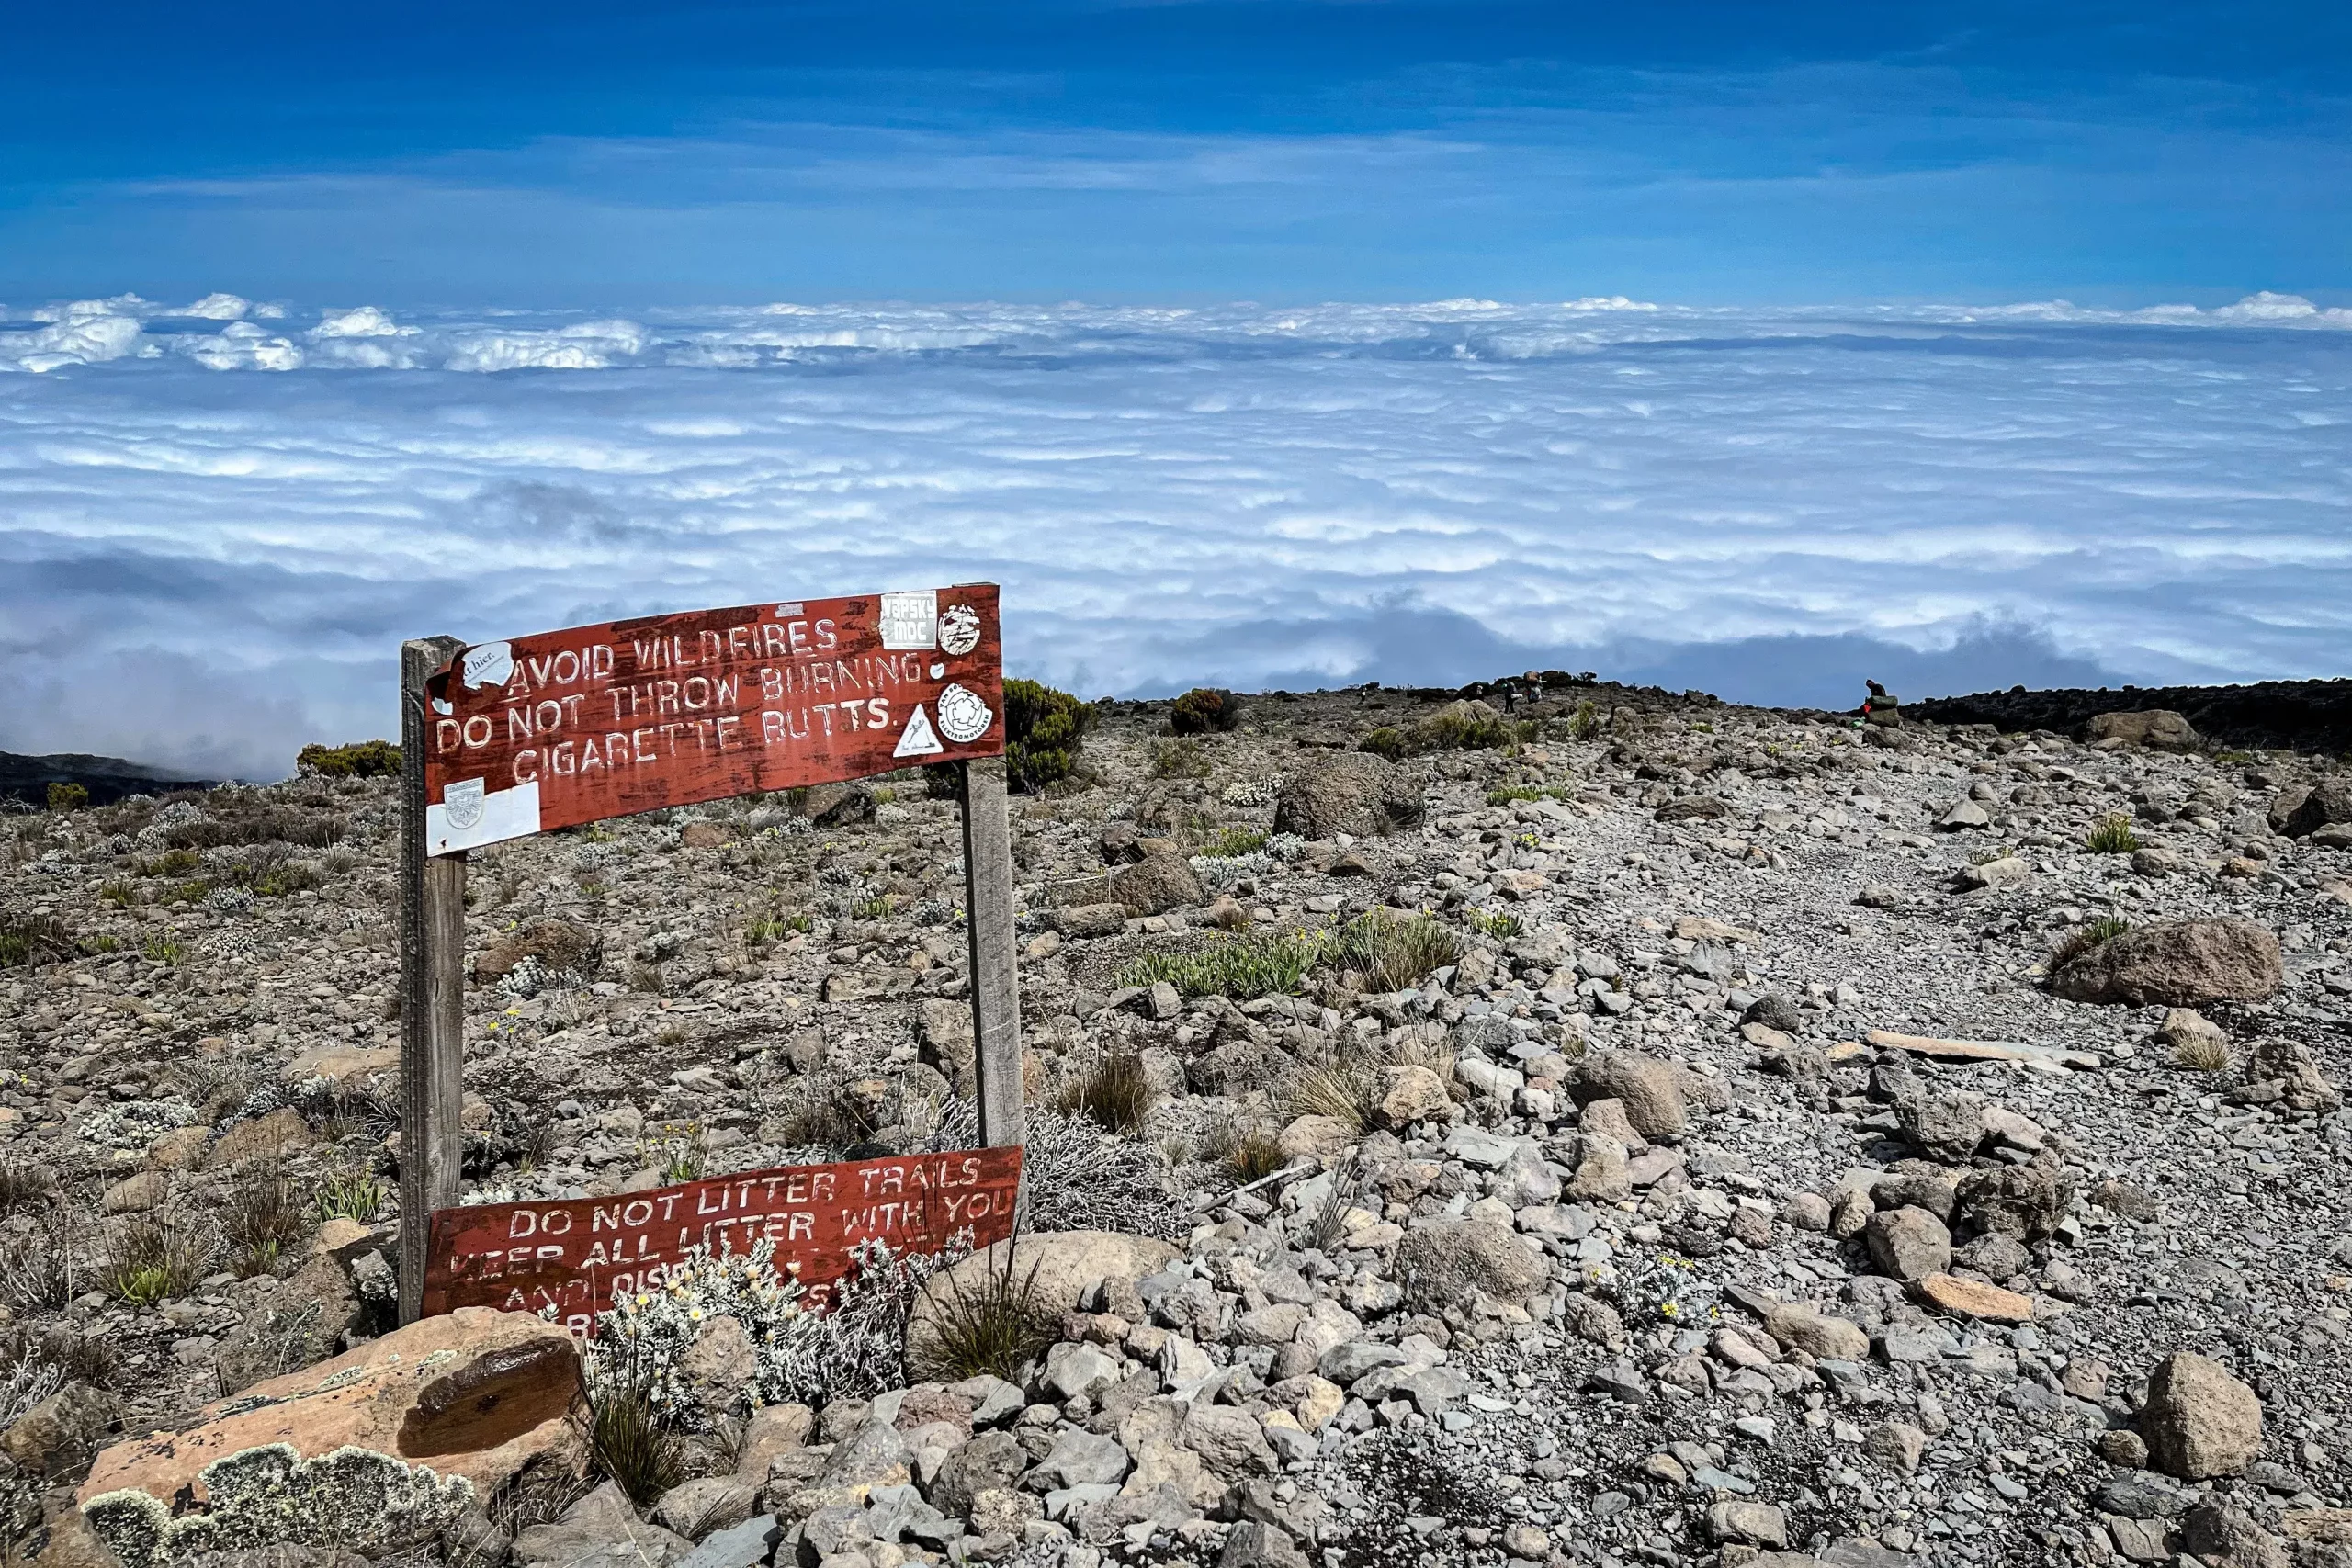 the magnificent view of snow and clouds along with caution board at Kilimanjaro peak after trekking for 5 days